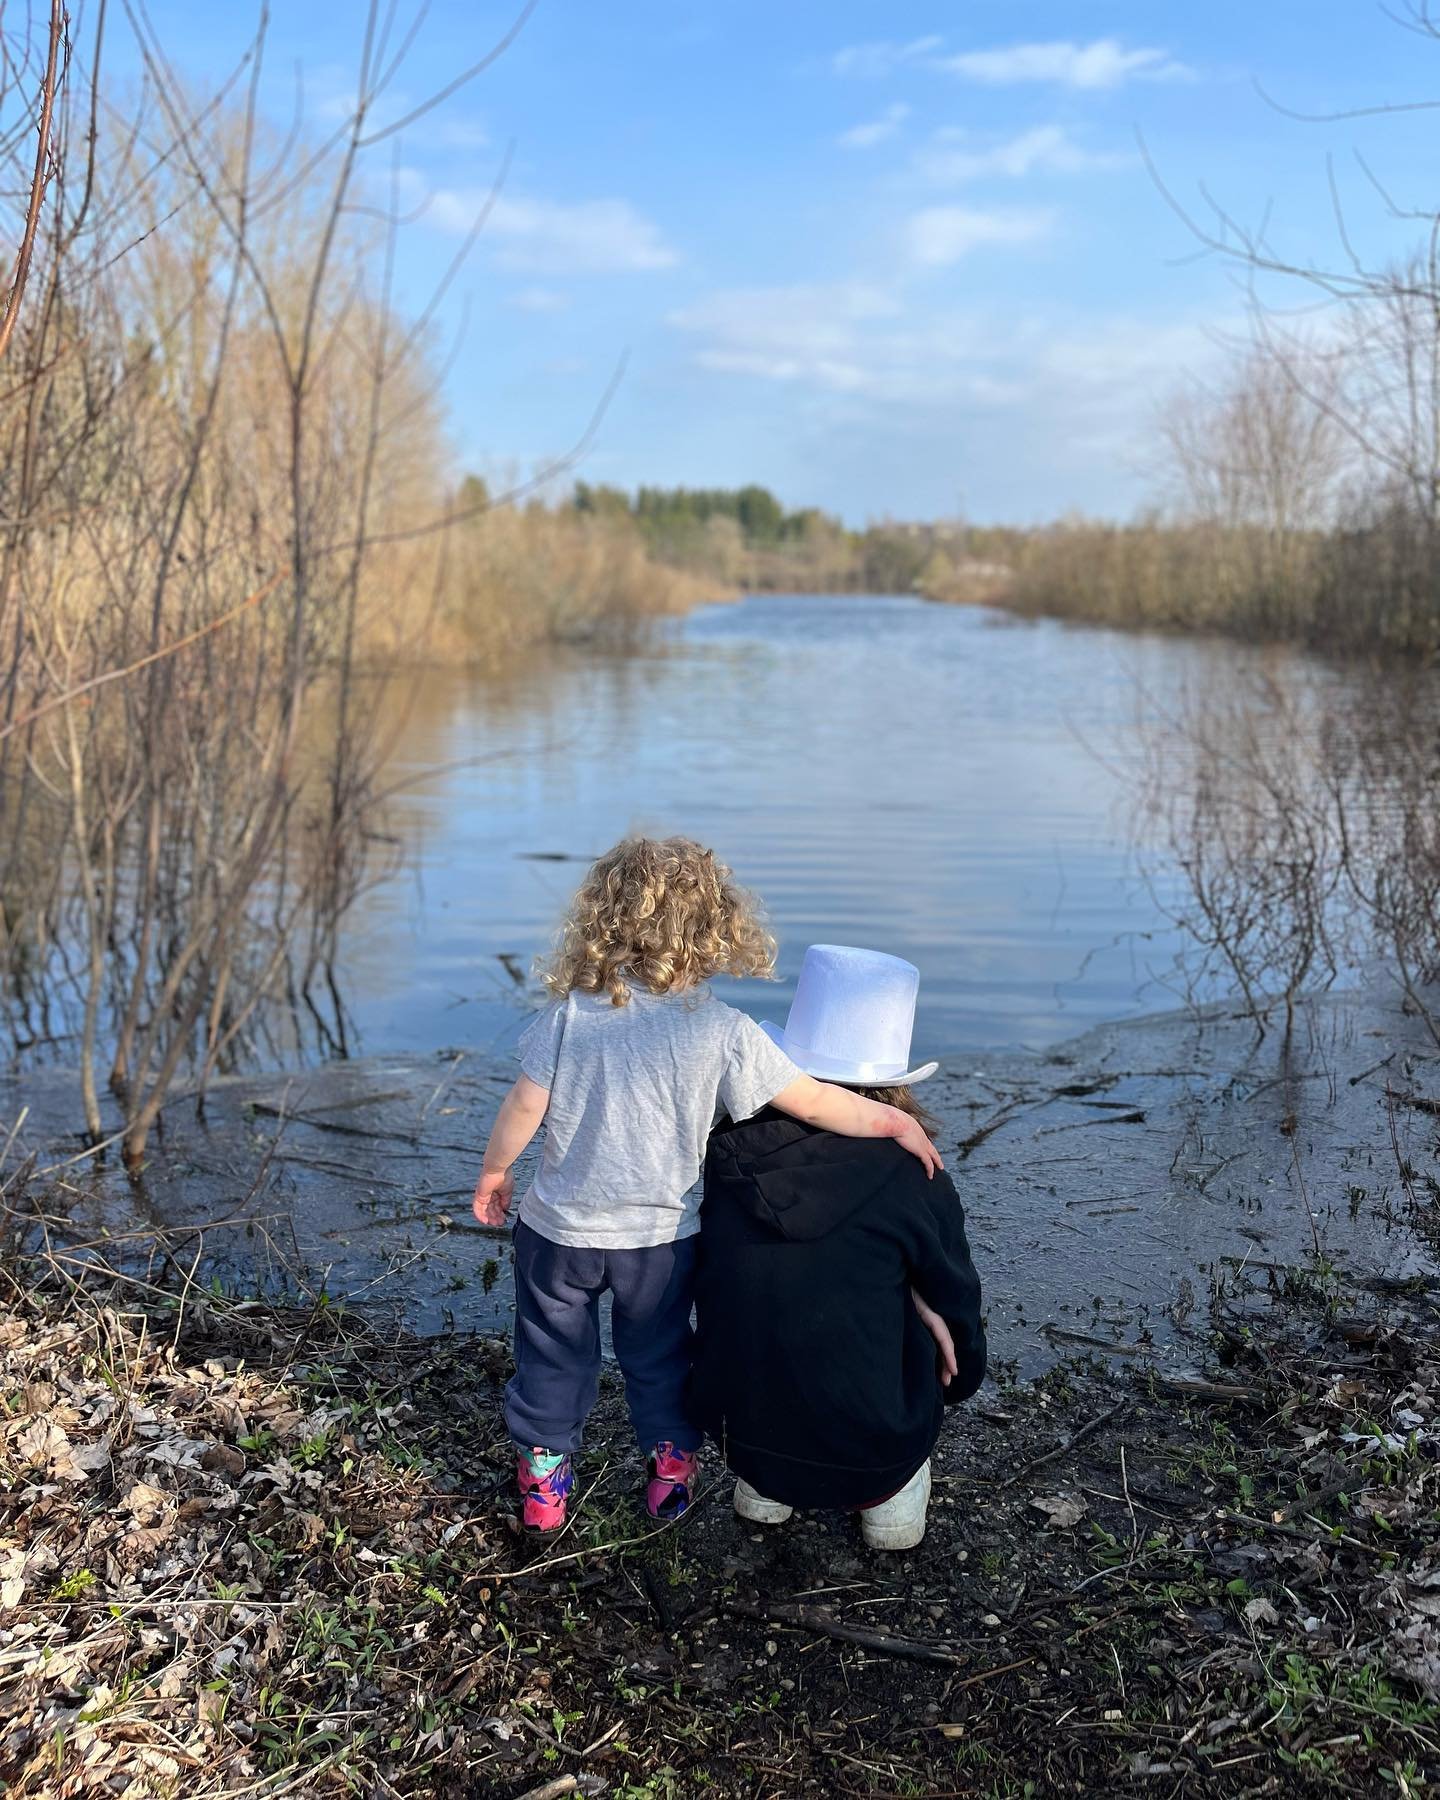 I cannot begin to tell you how much I enjoy exploring nature with these two beings. 

I was away all afternoon and needed to spend some quality time with them and move my body. On the way home I wrote to my partner &ldquo;tell the kids to get ready, 